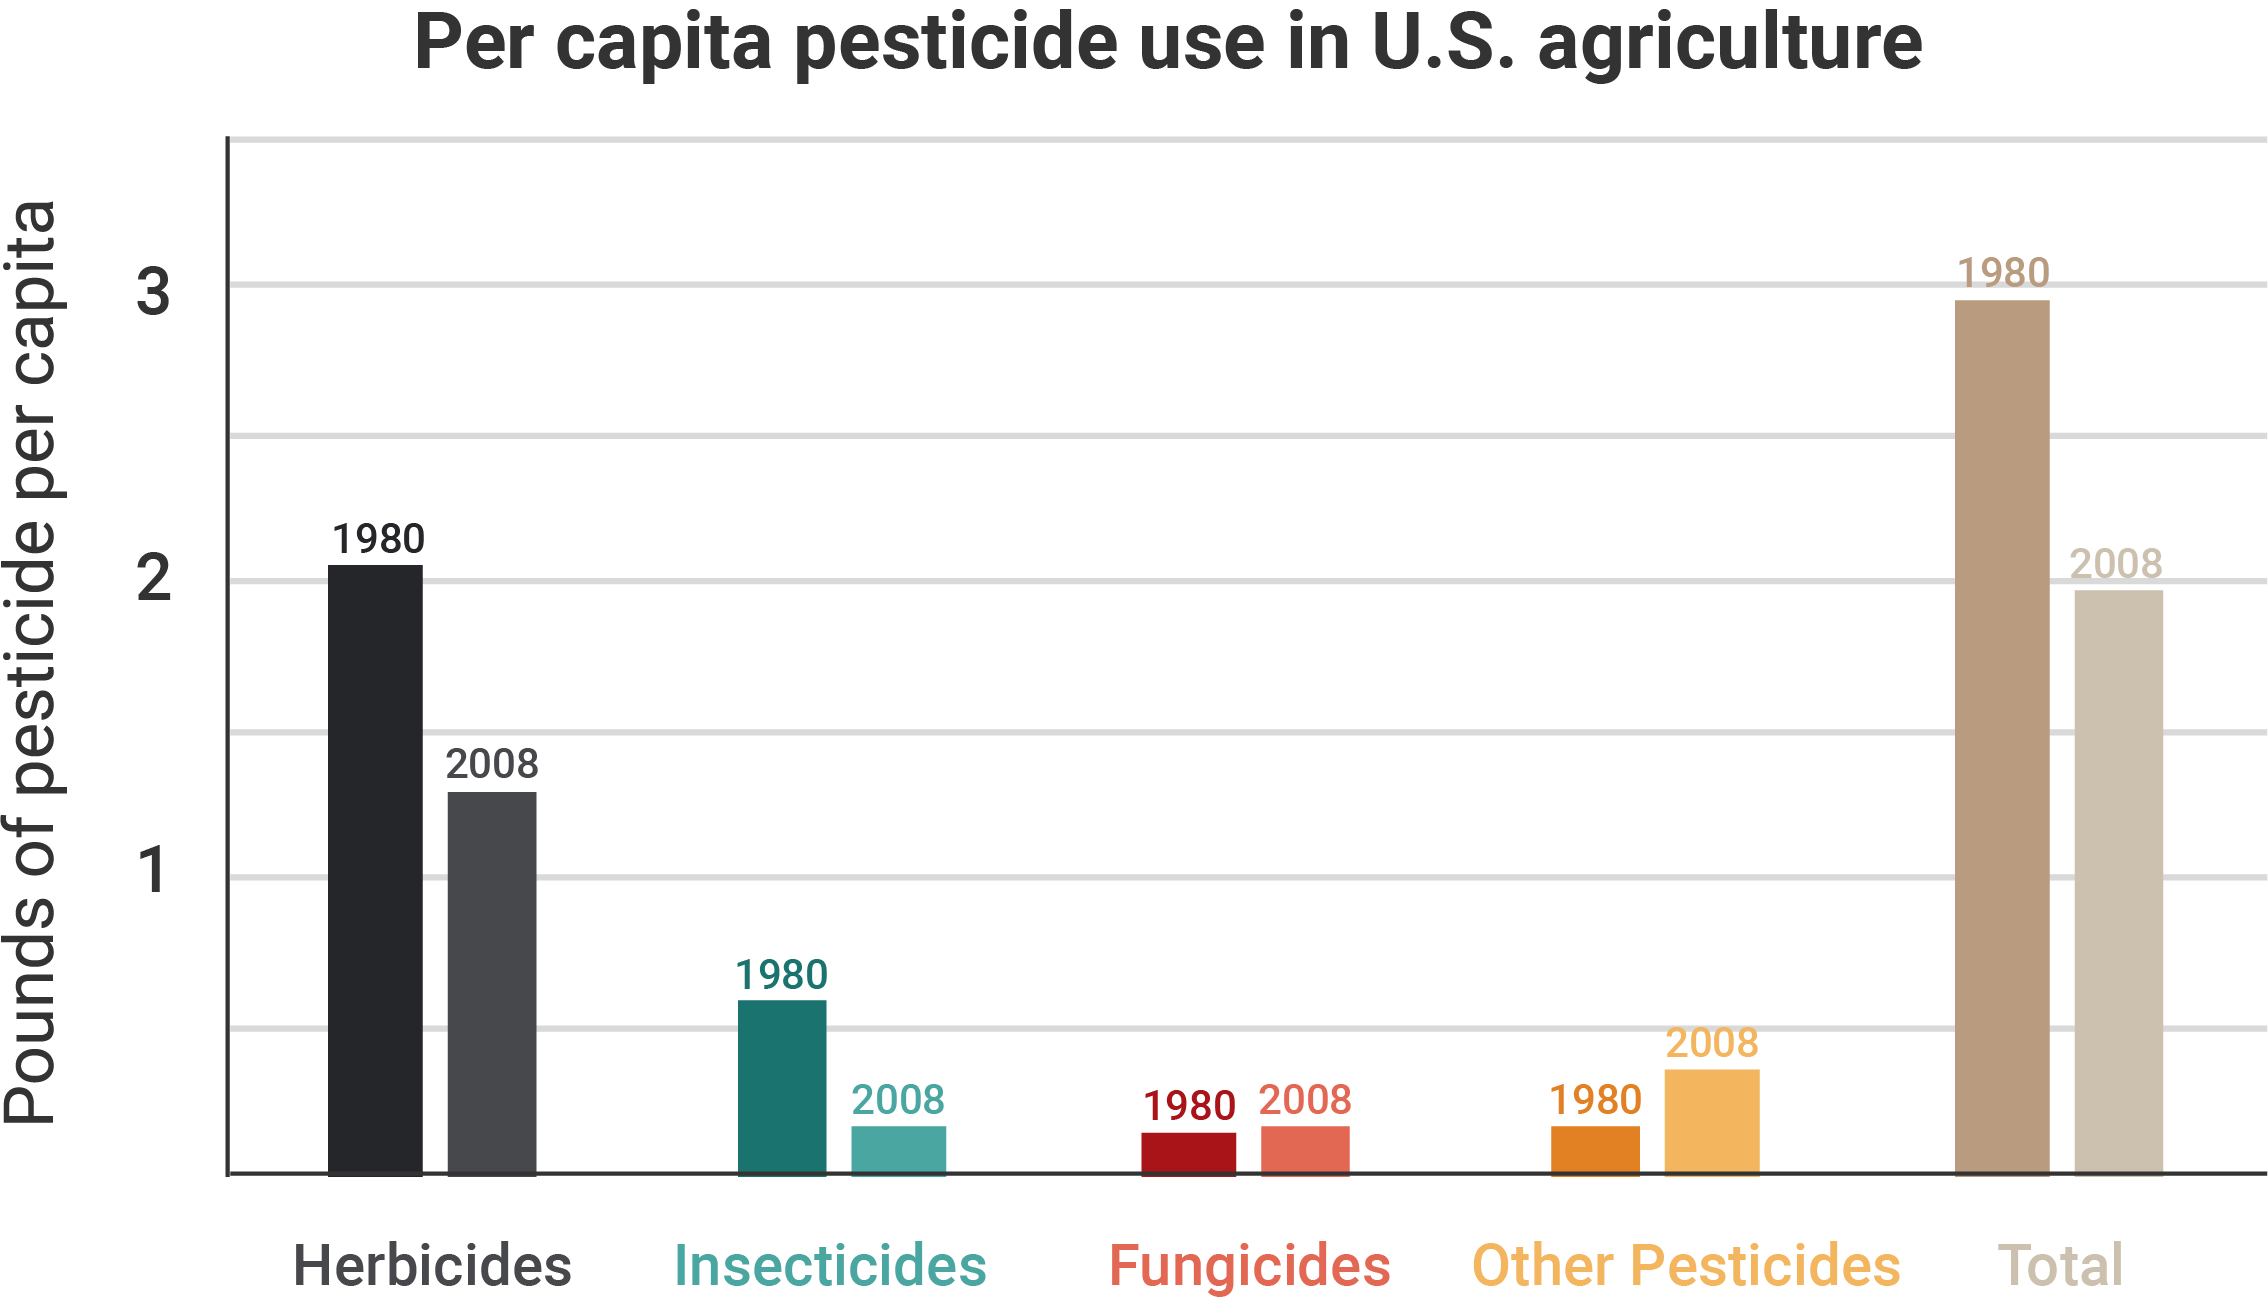 Pounds of pesticide used per capita in US agriculture in 1980 and 2008